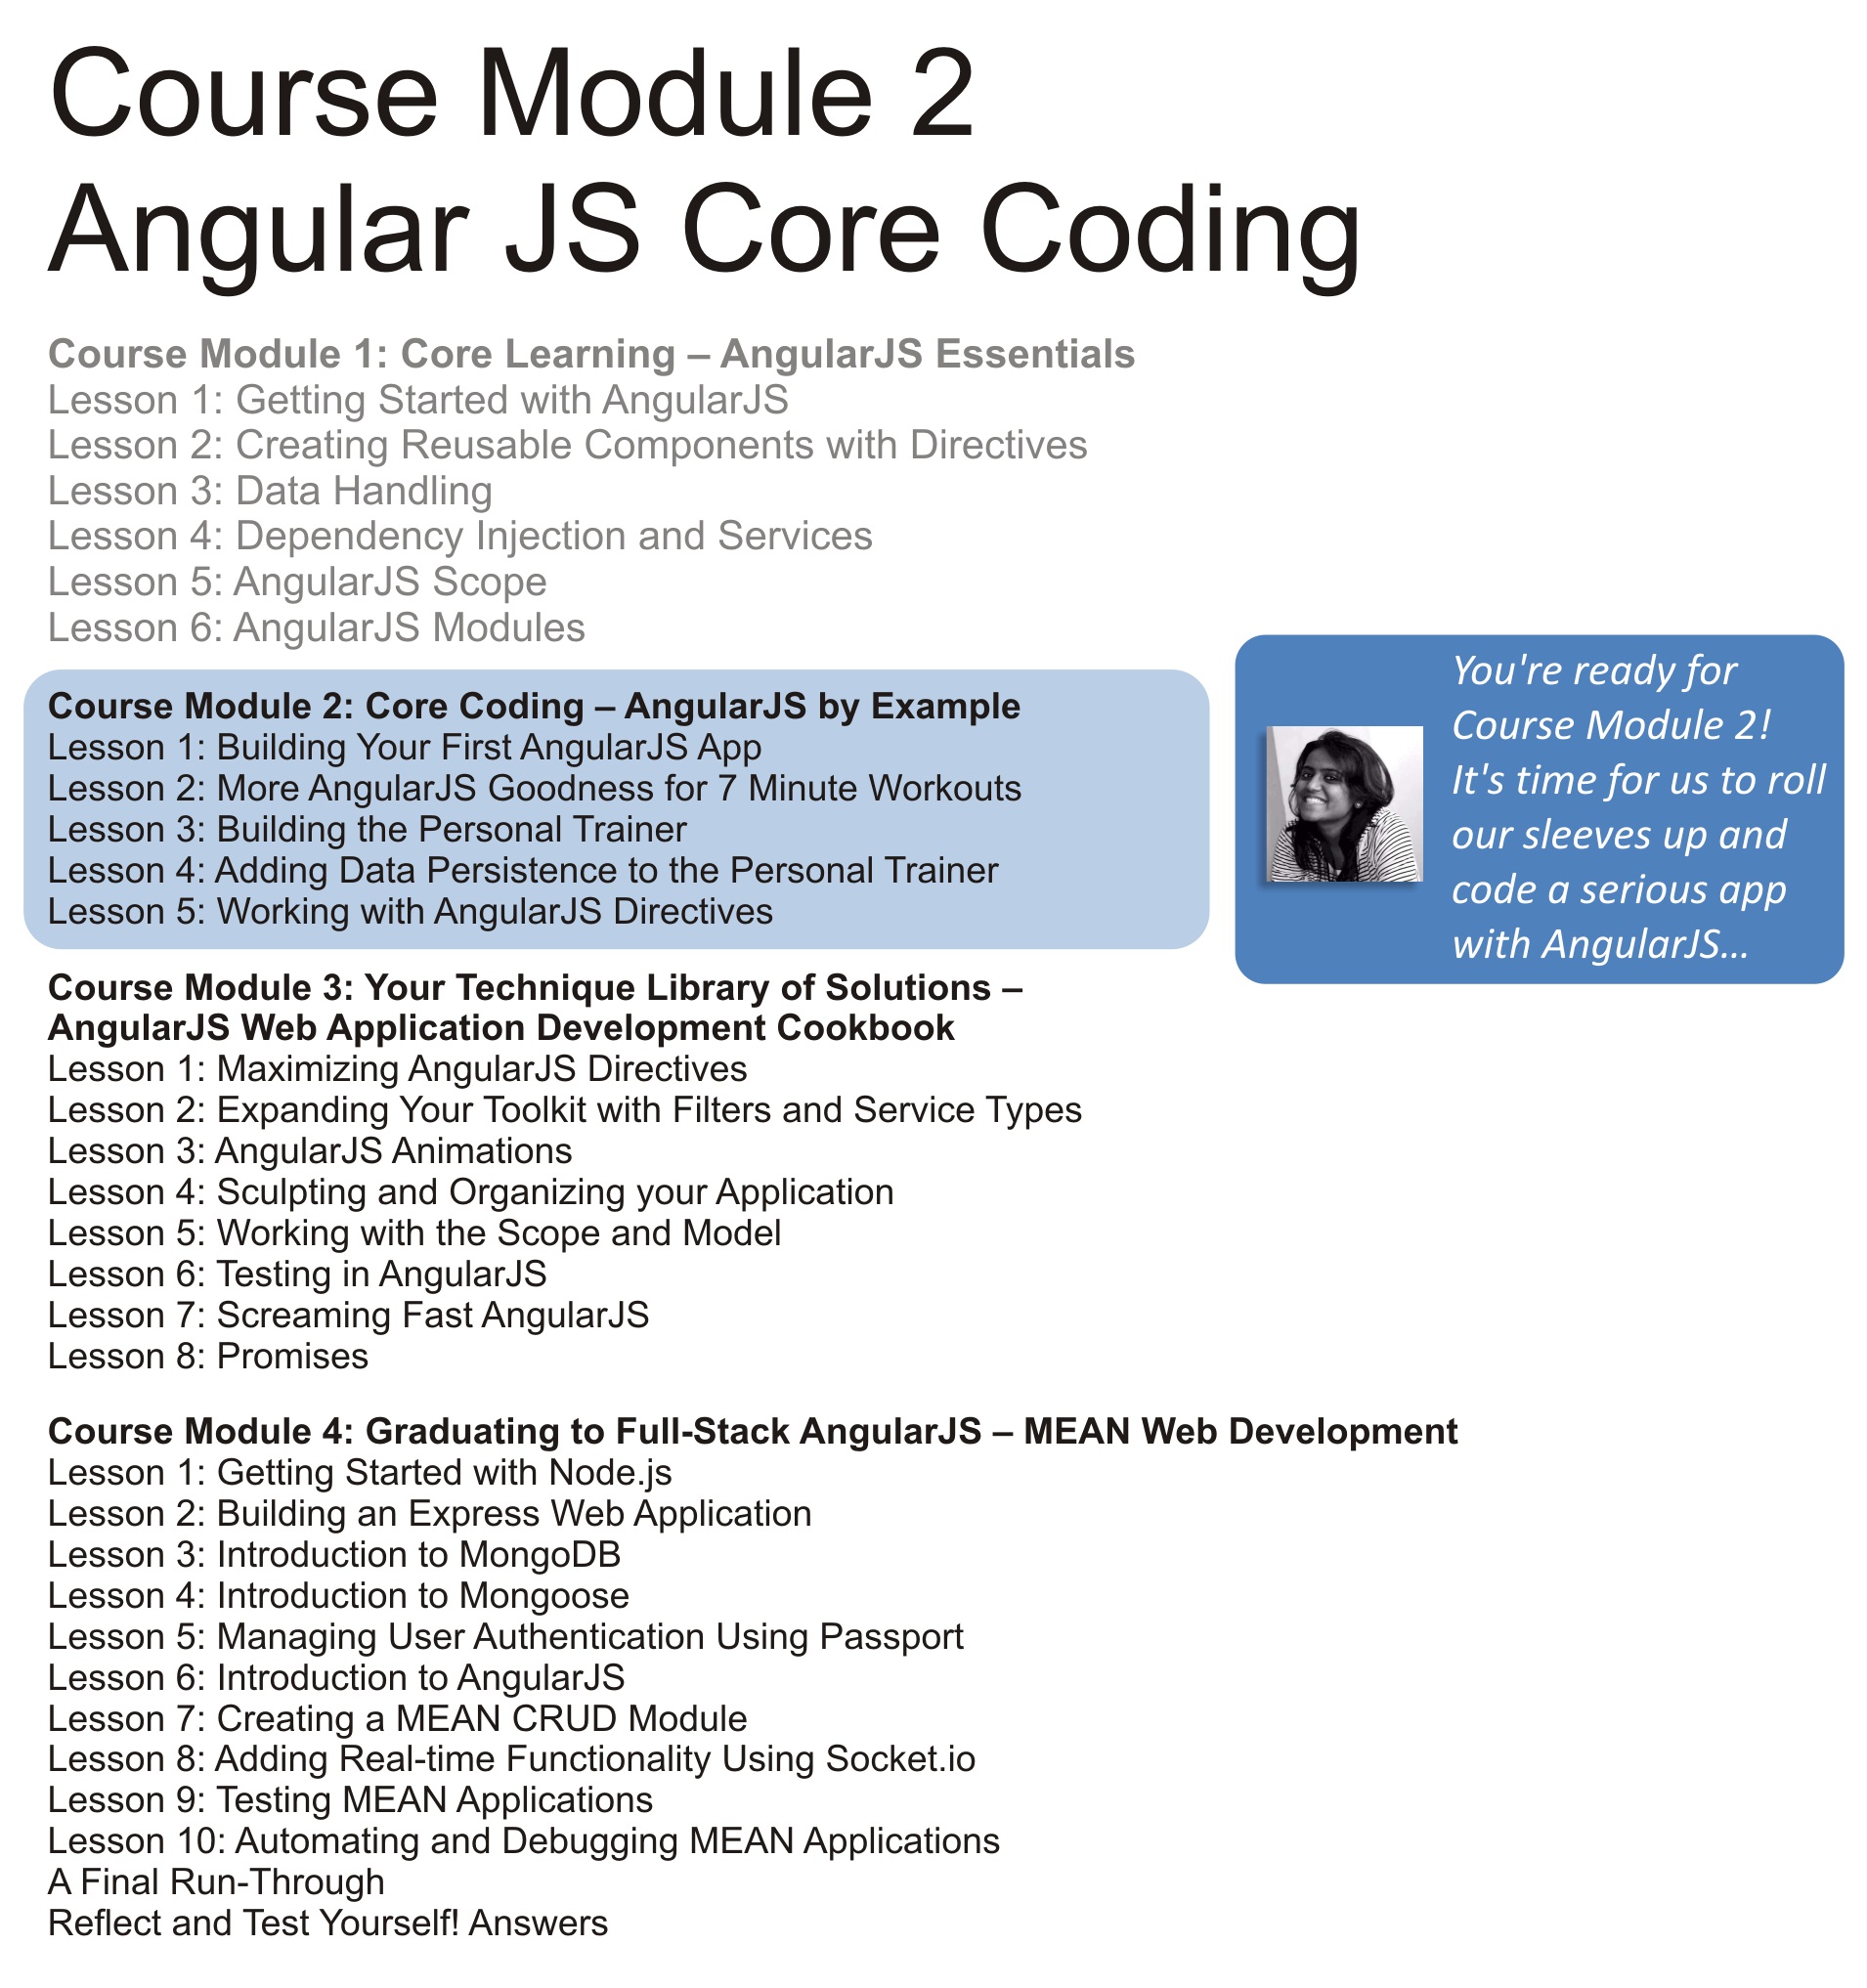 Core Coding – AngularJS By Example